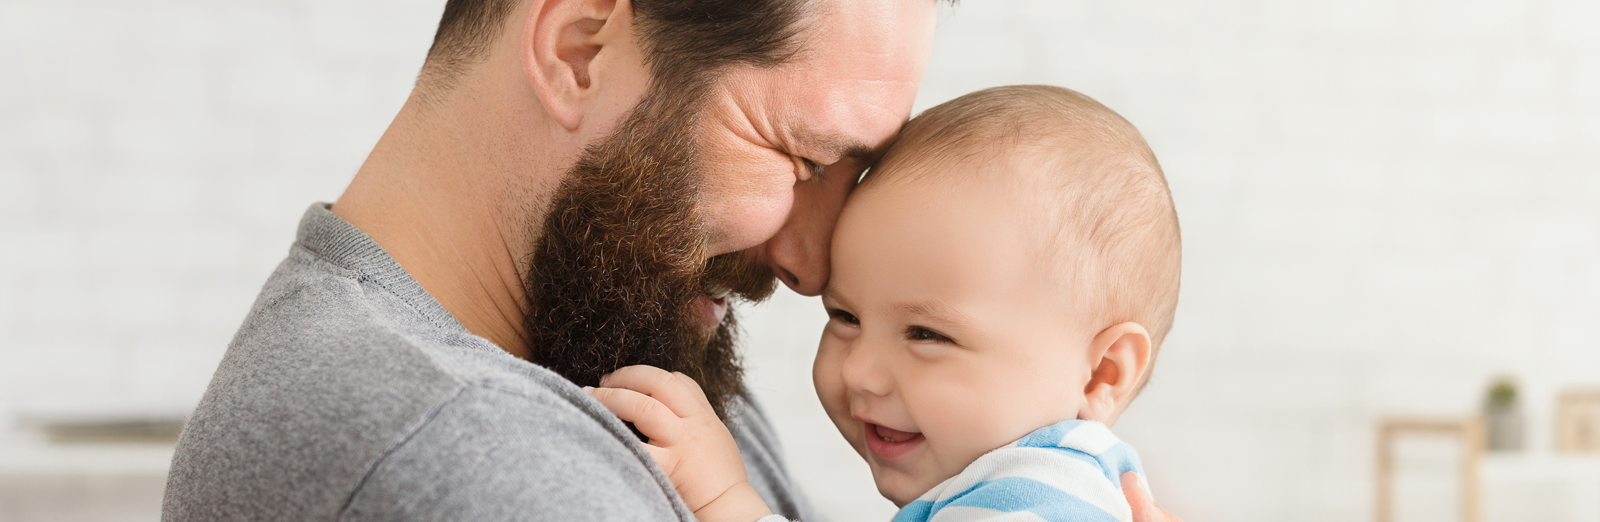 Dad-and-baby-smiling-1600x522.png